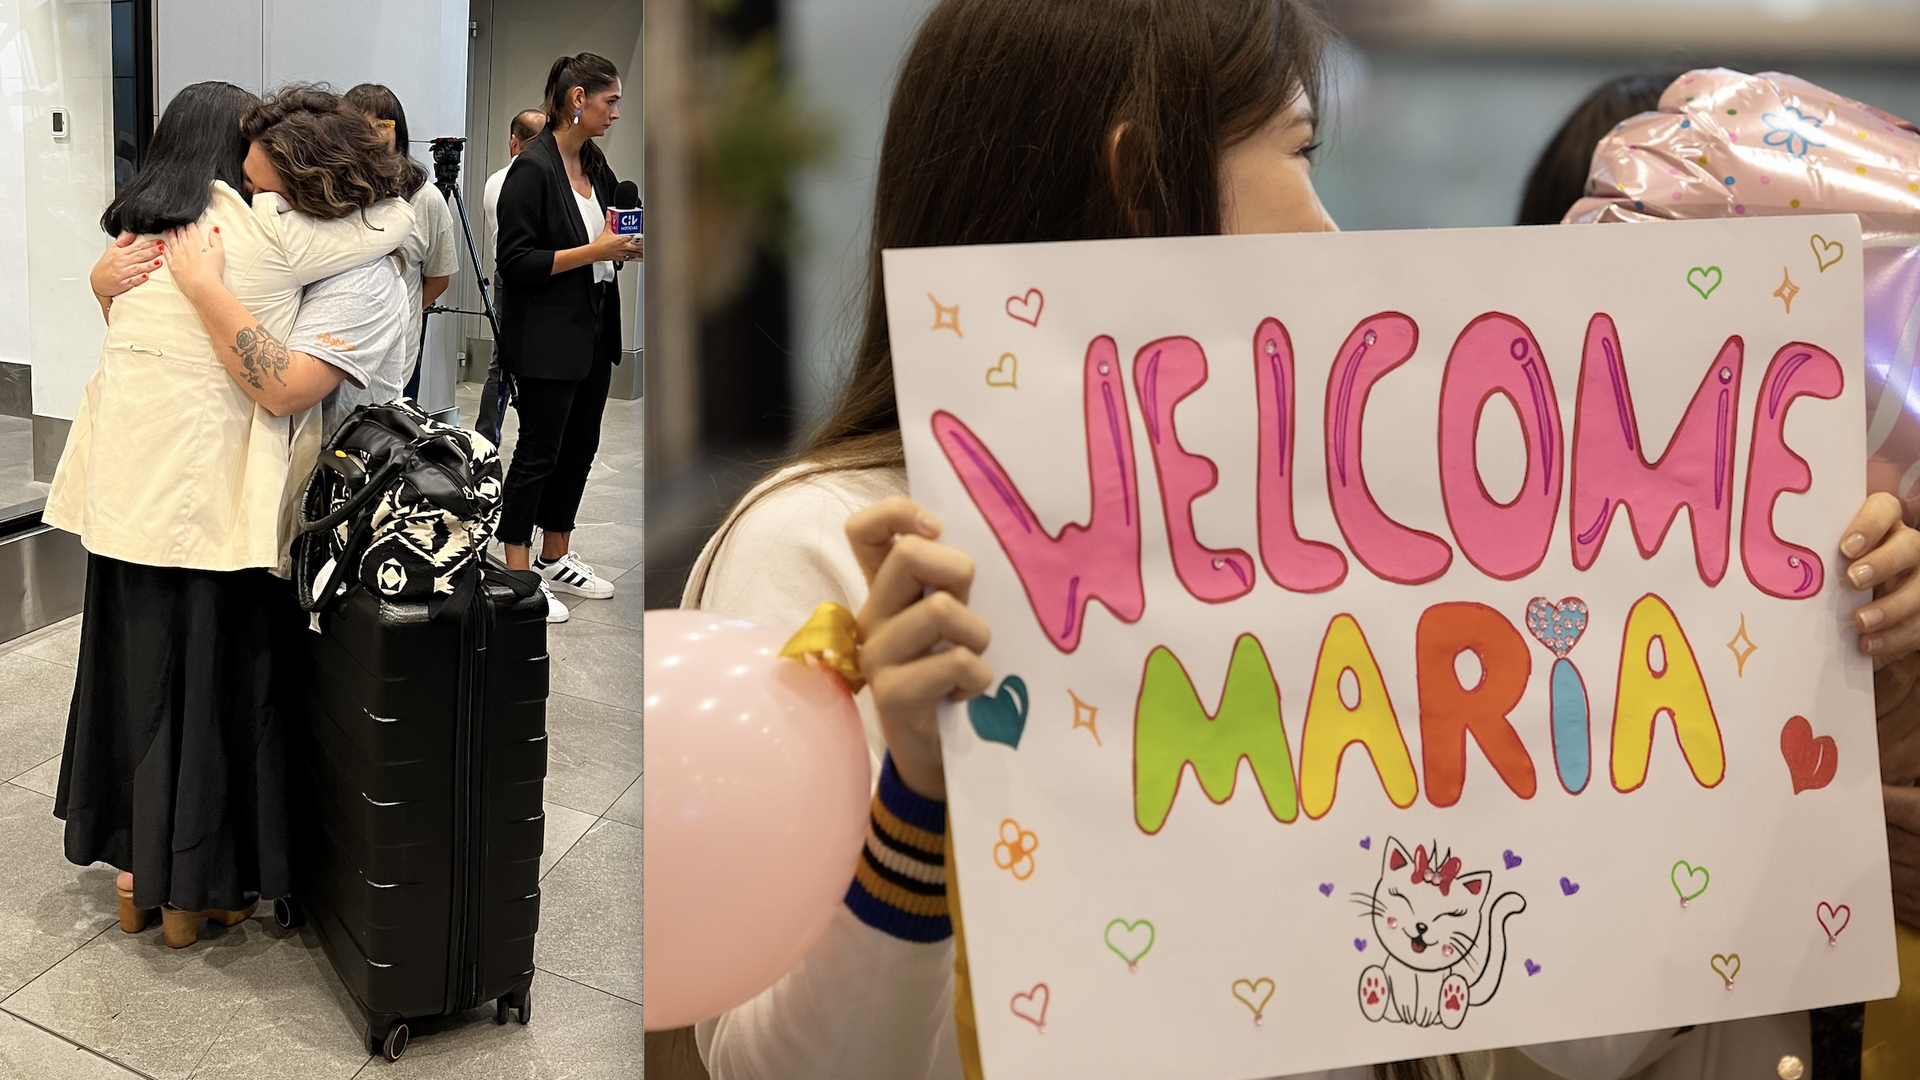 A photo of Maria and her mother embracing at the airport next to a photo of a girl holding a colorful sign reading "Welcome Maria"